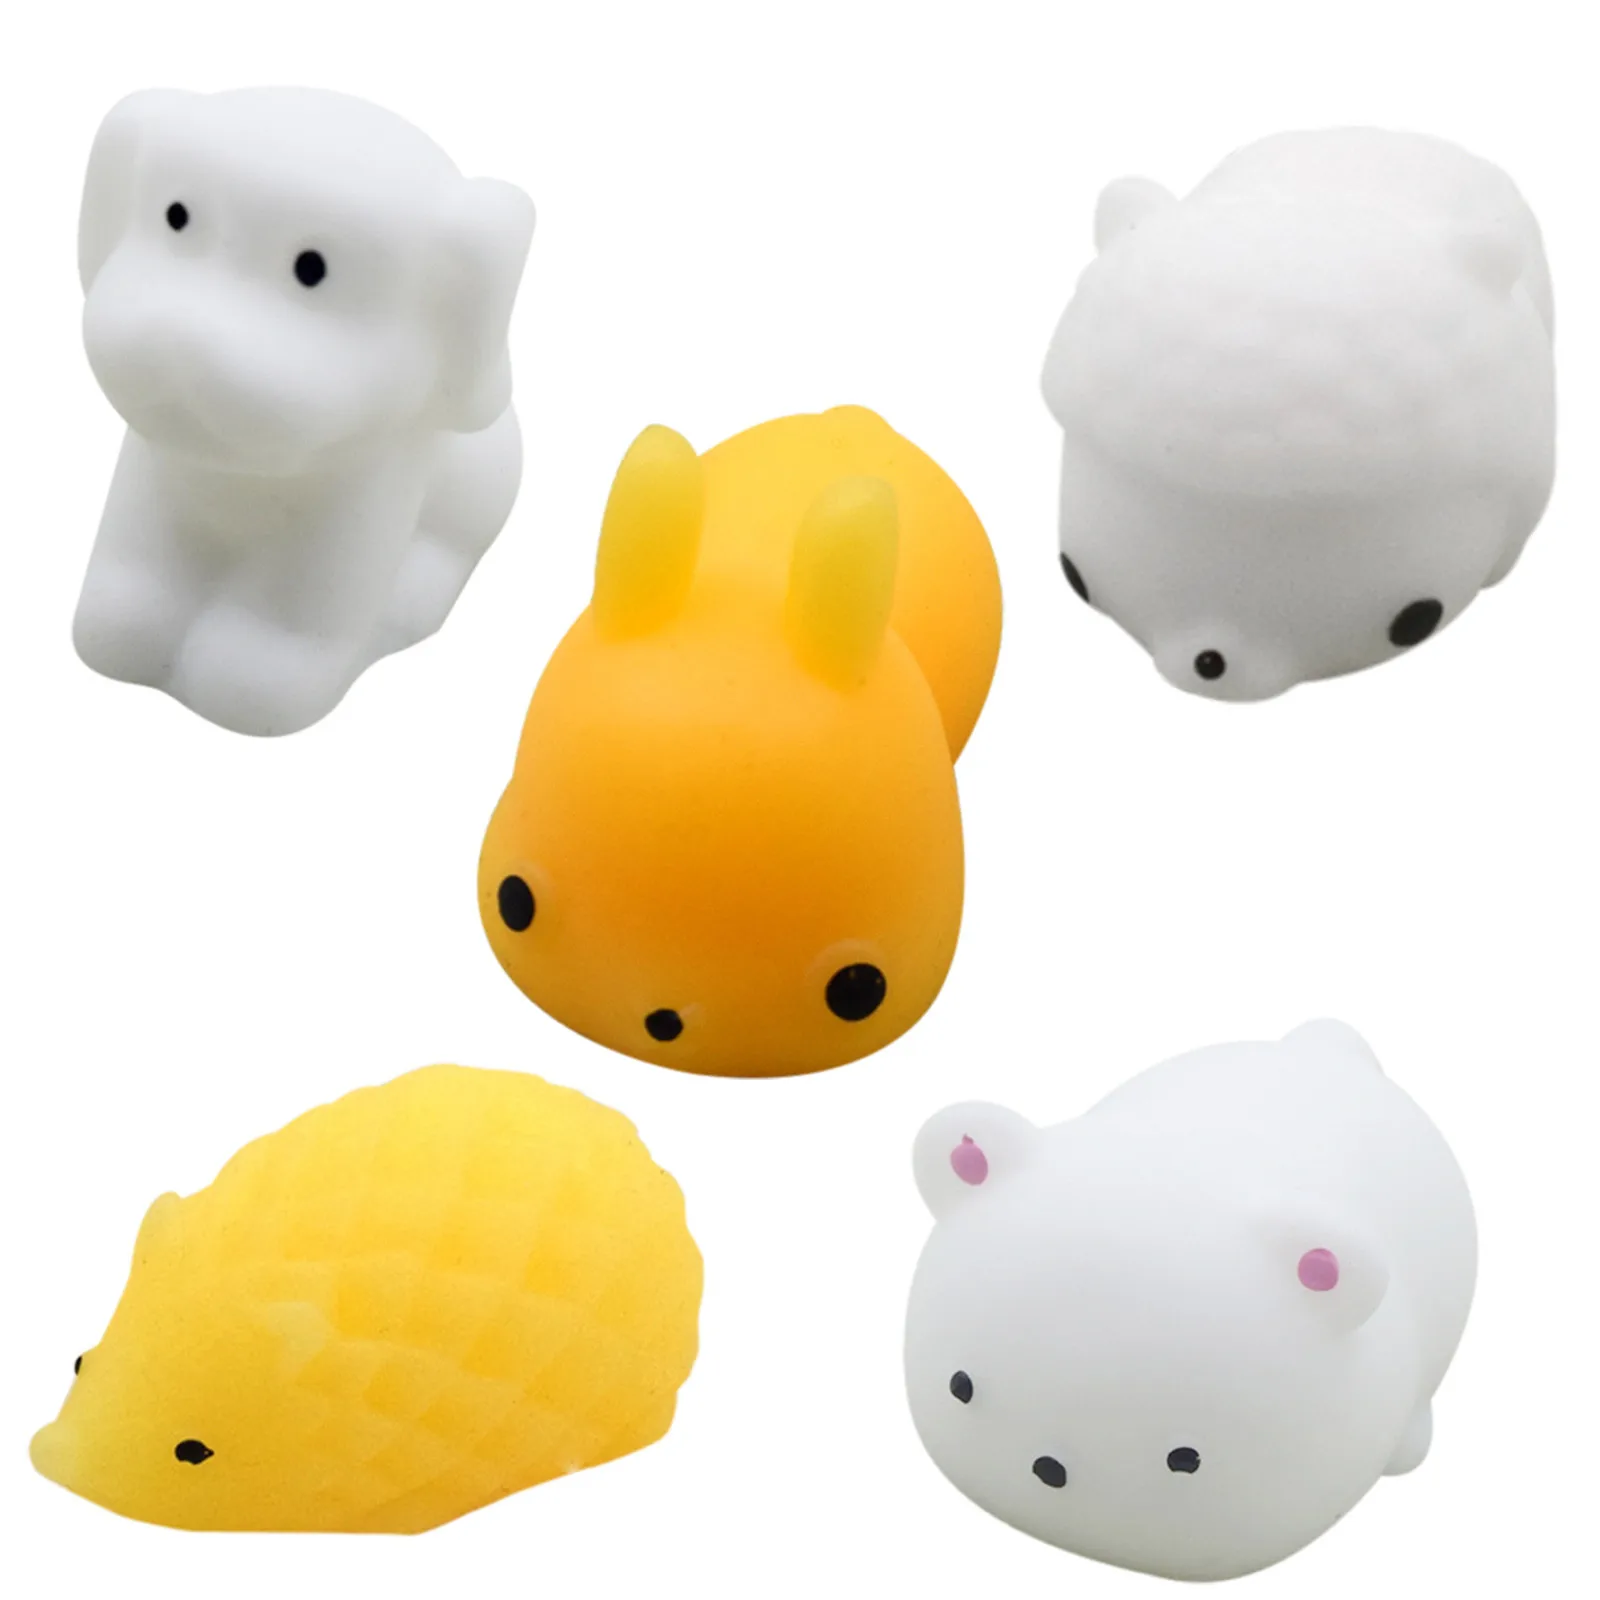 

5Pack Cute Animal Decompression Toy Stress Reliever Reduce Anxiety Fidget Toys For Child Adults juguete antiestres niños c2